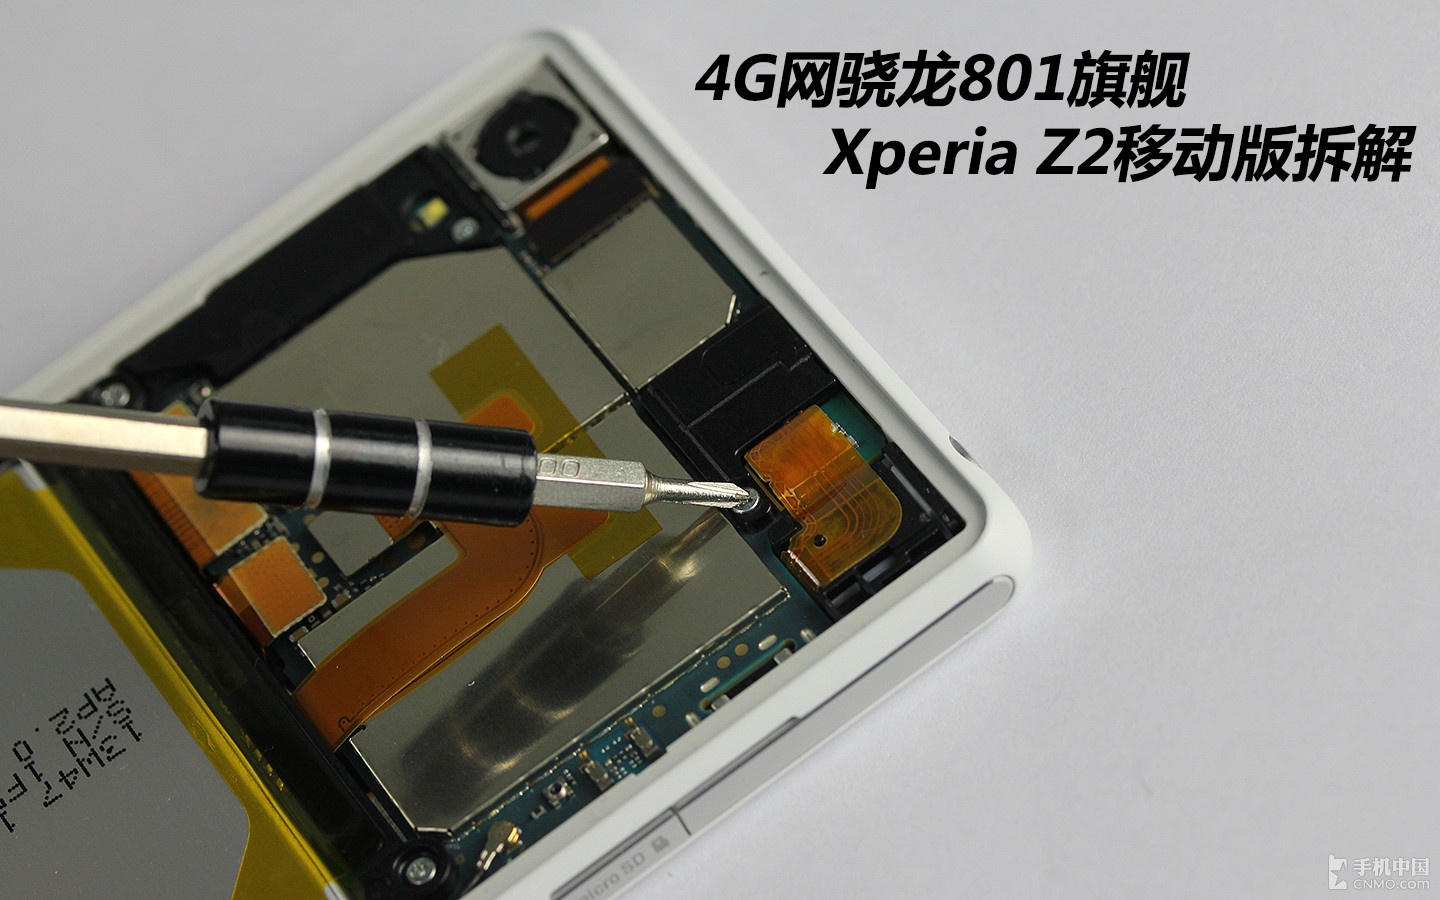 Xperia Z2 disassembly guide | Xperia Blog